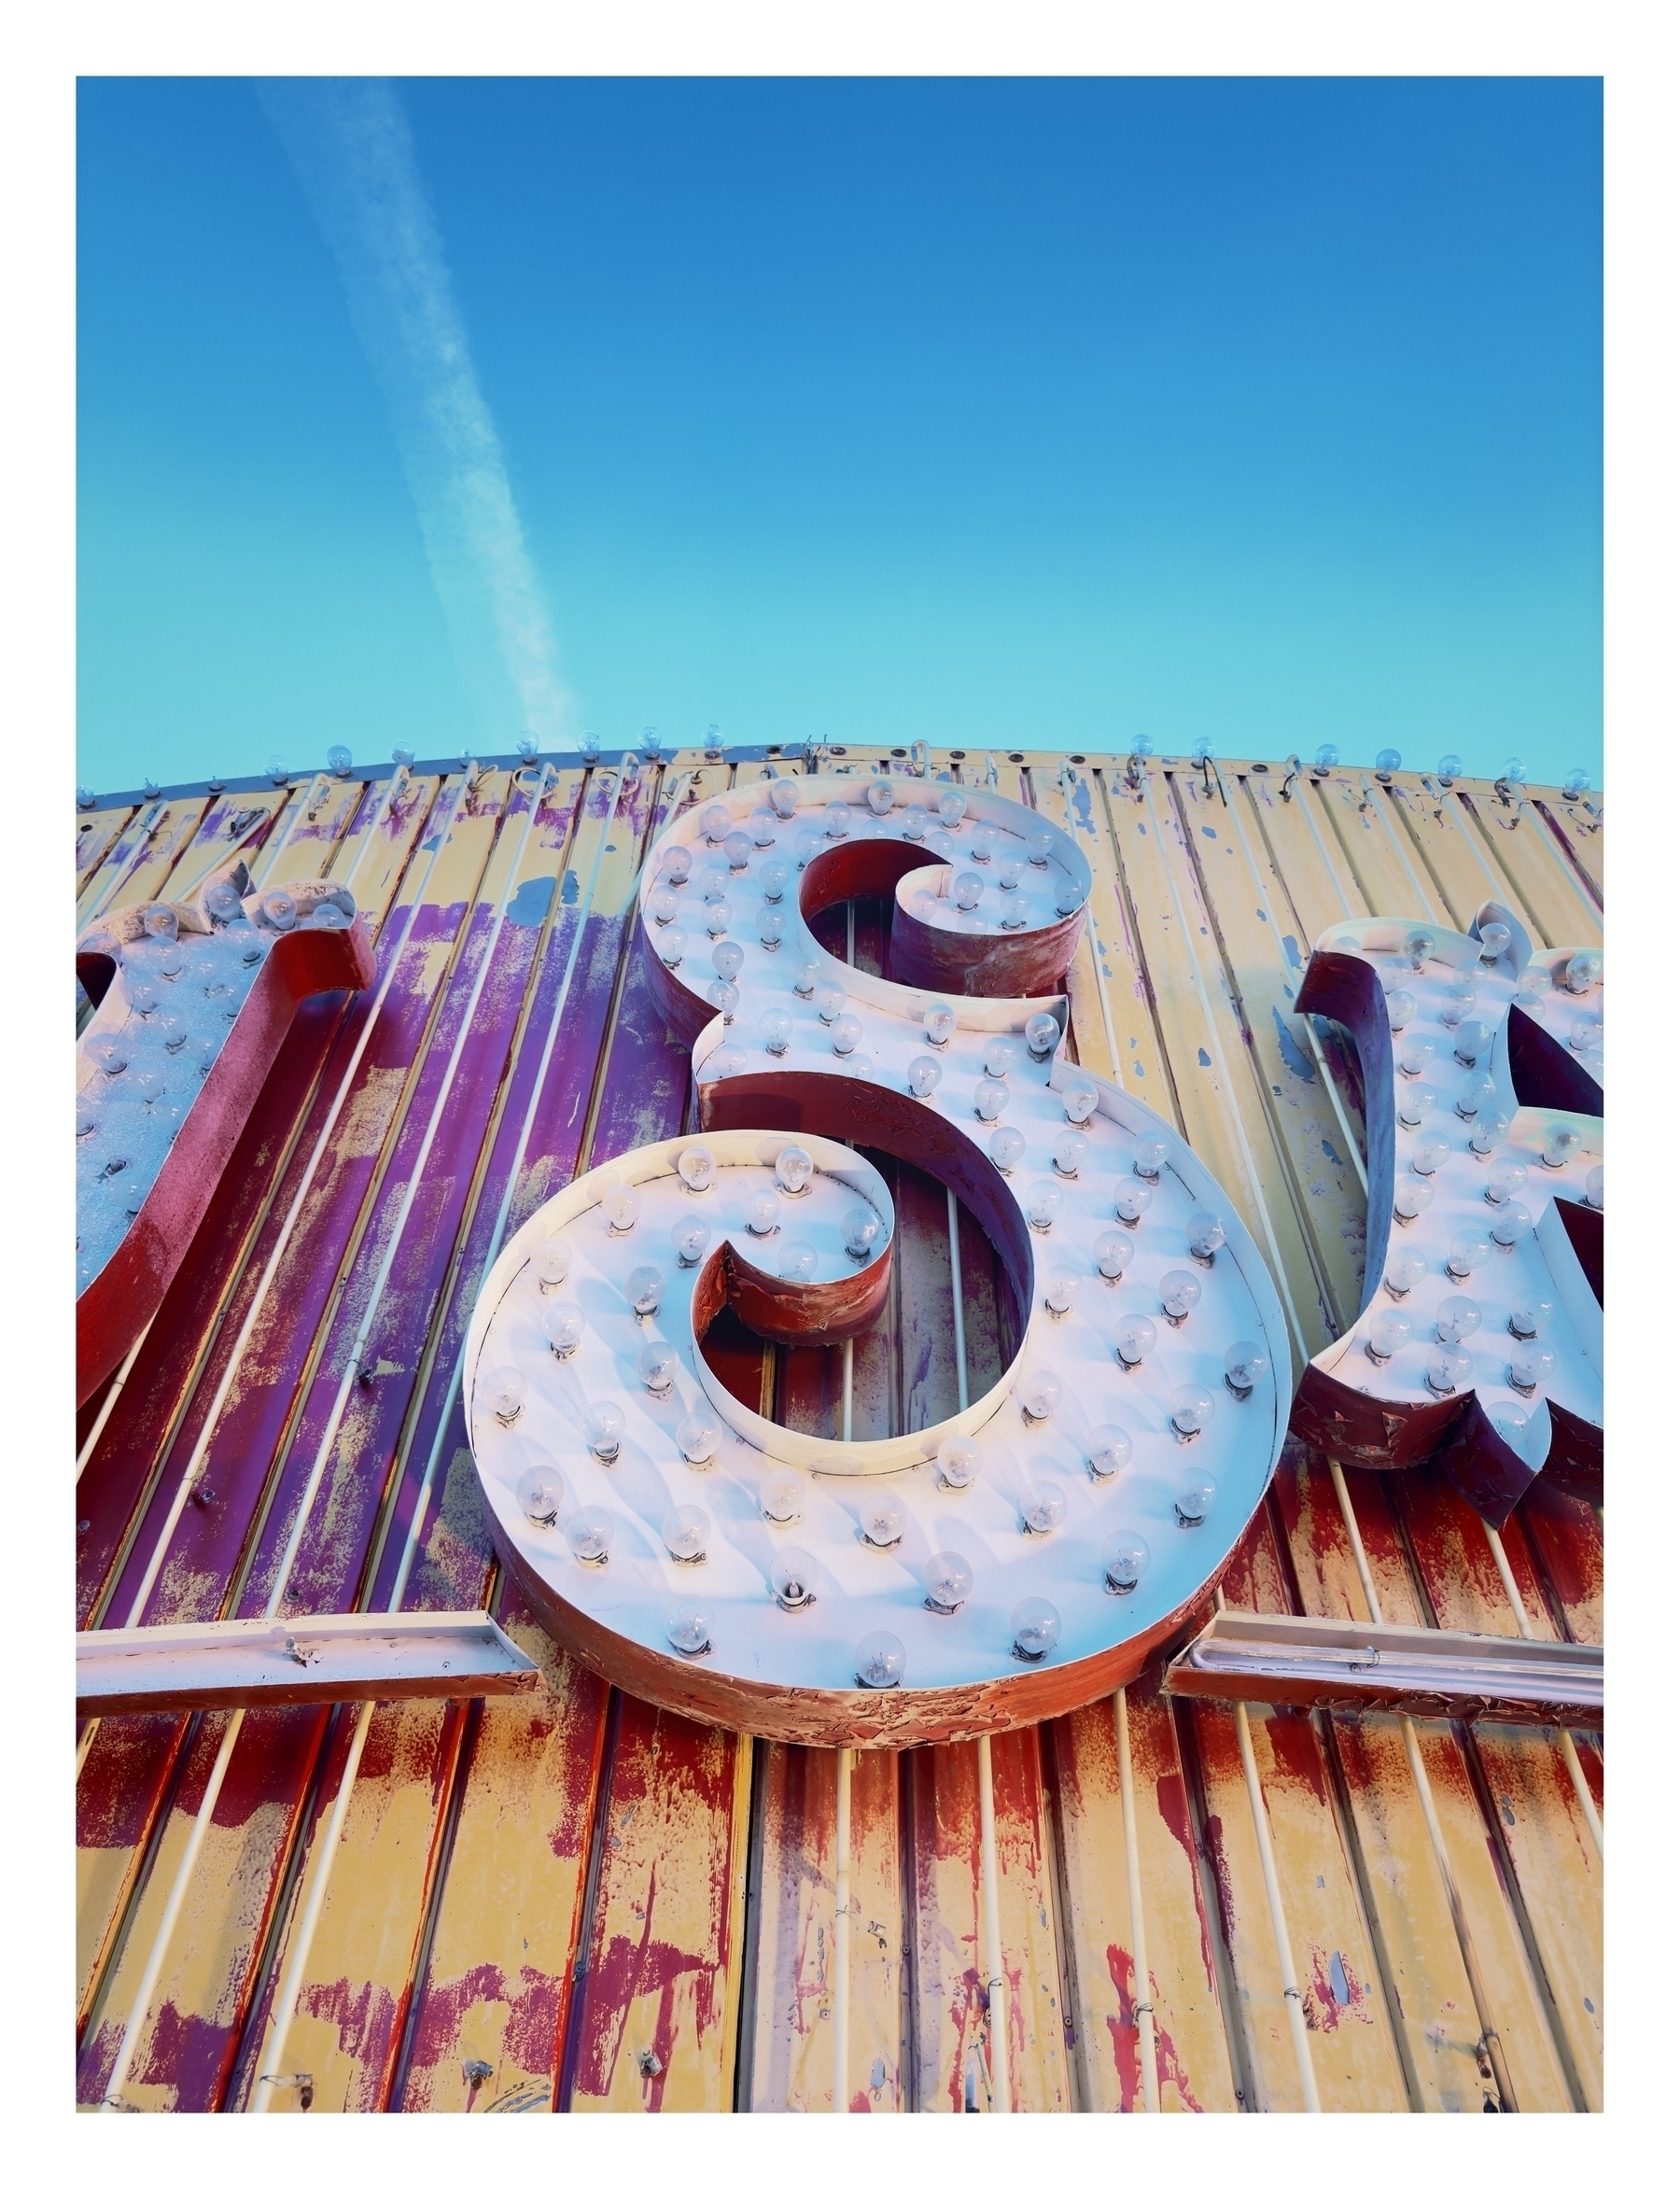 Large, illuminated letters affixed to a corrugated metal surface, under a clear blue sky with a contrail.